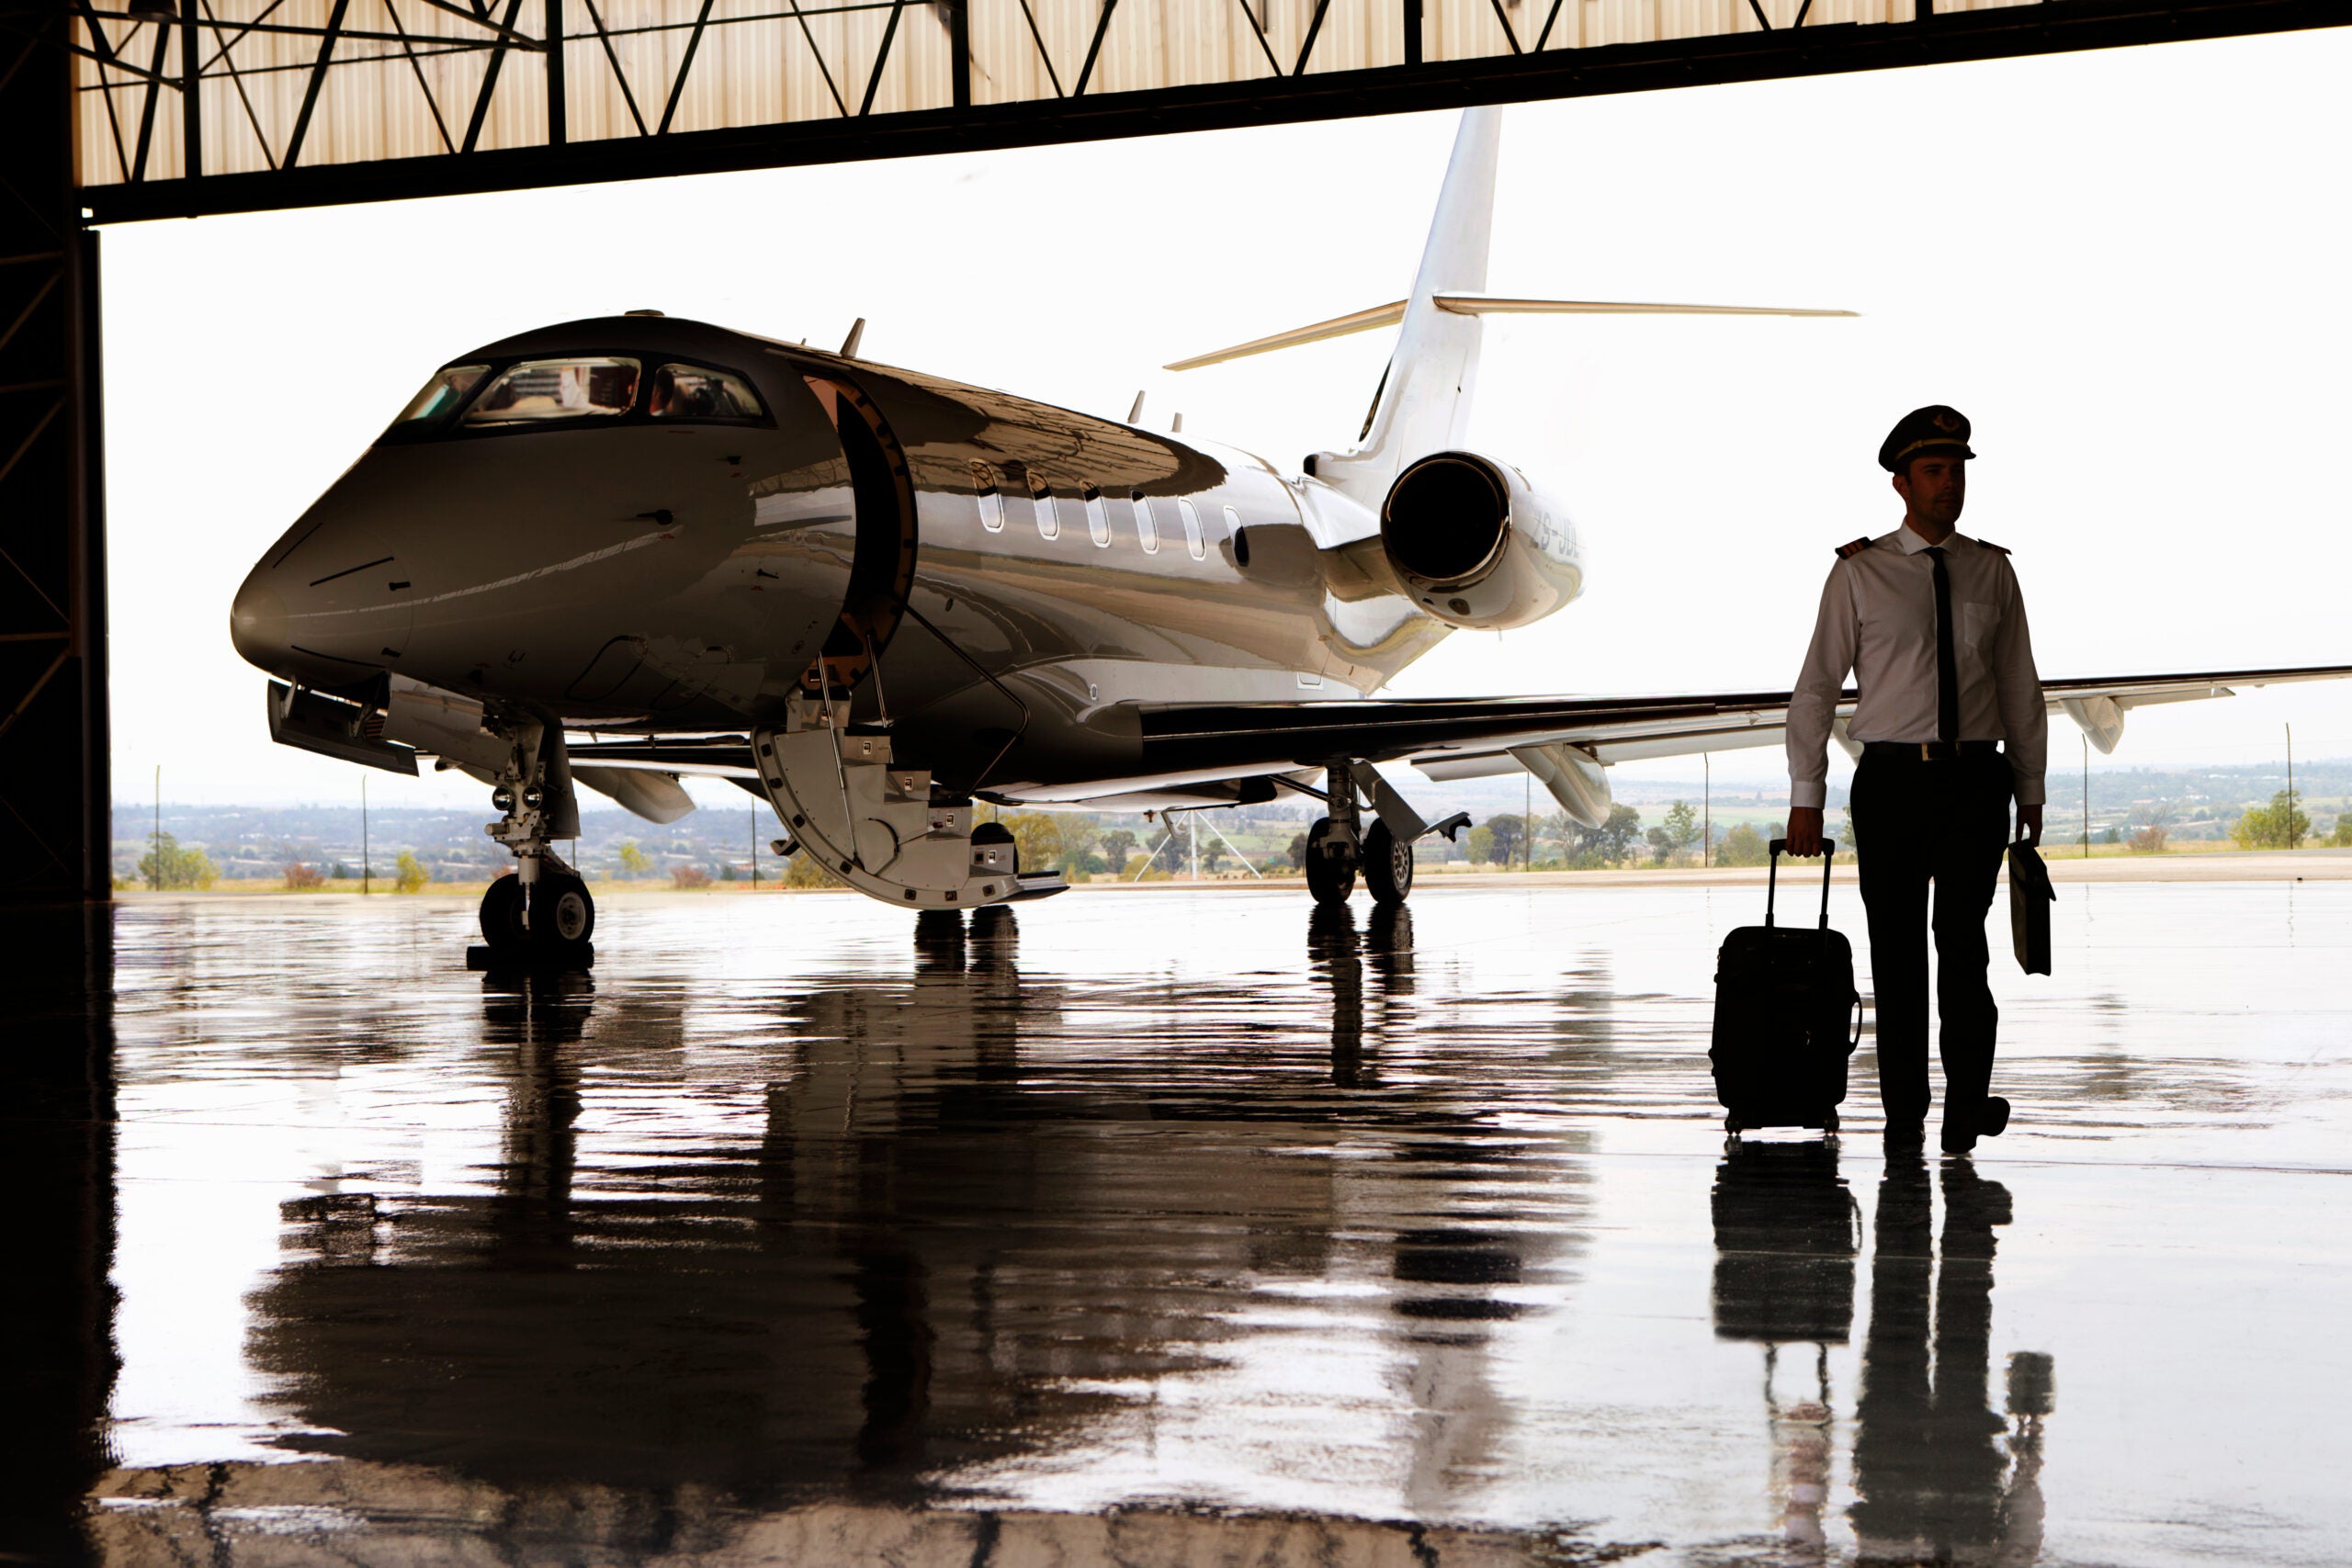 How to Find the Right Corporate Flying Job for You